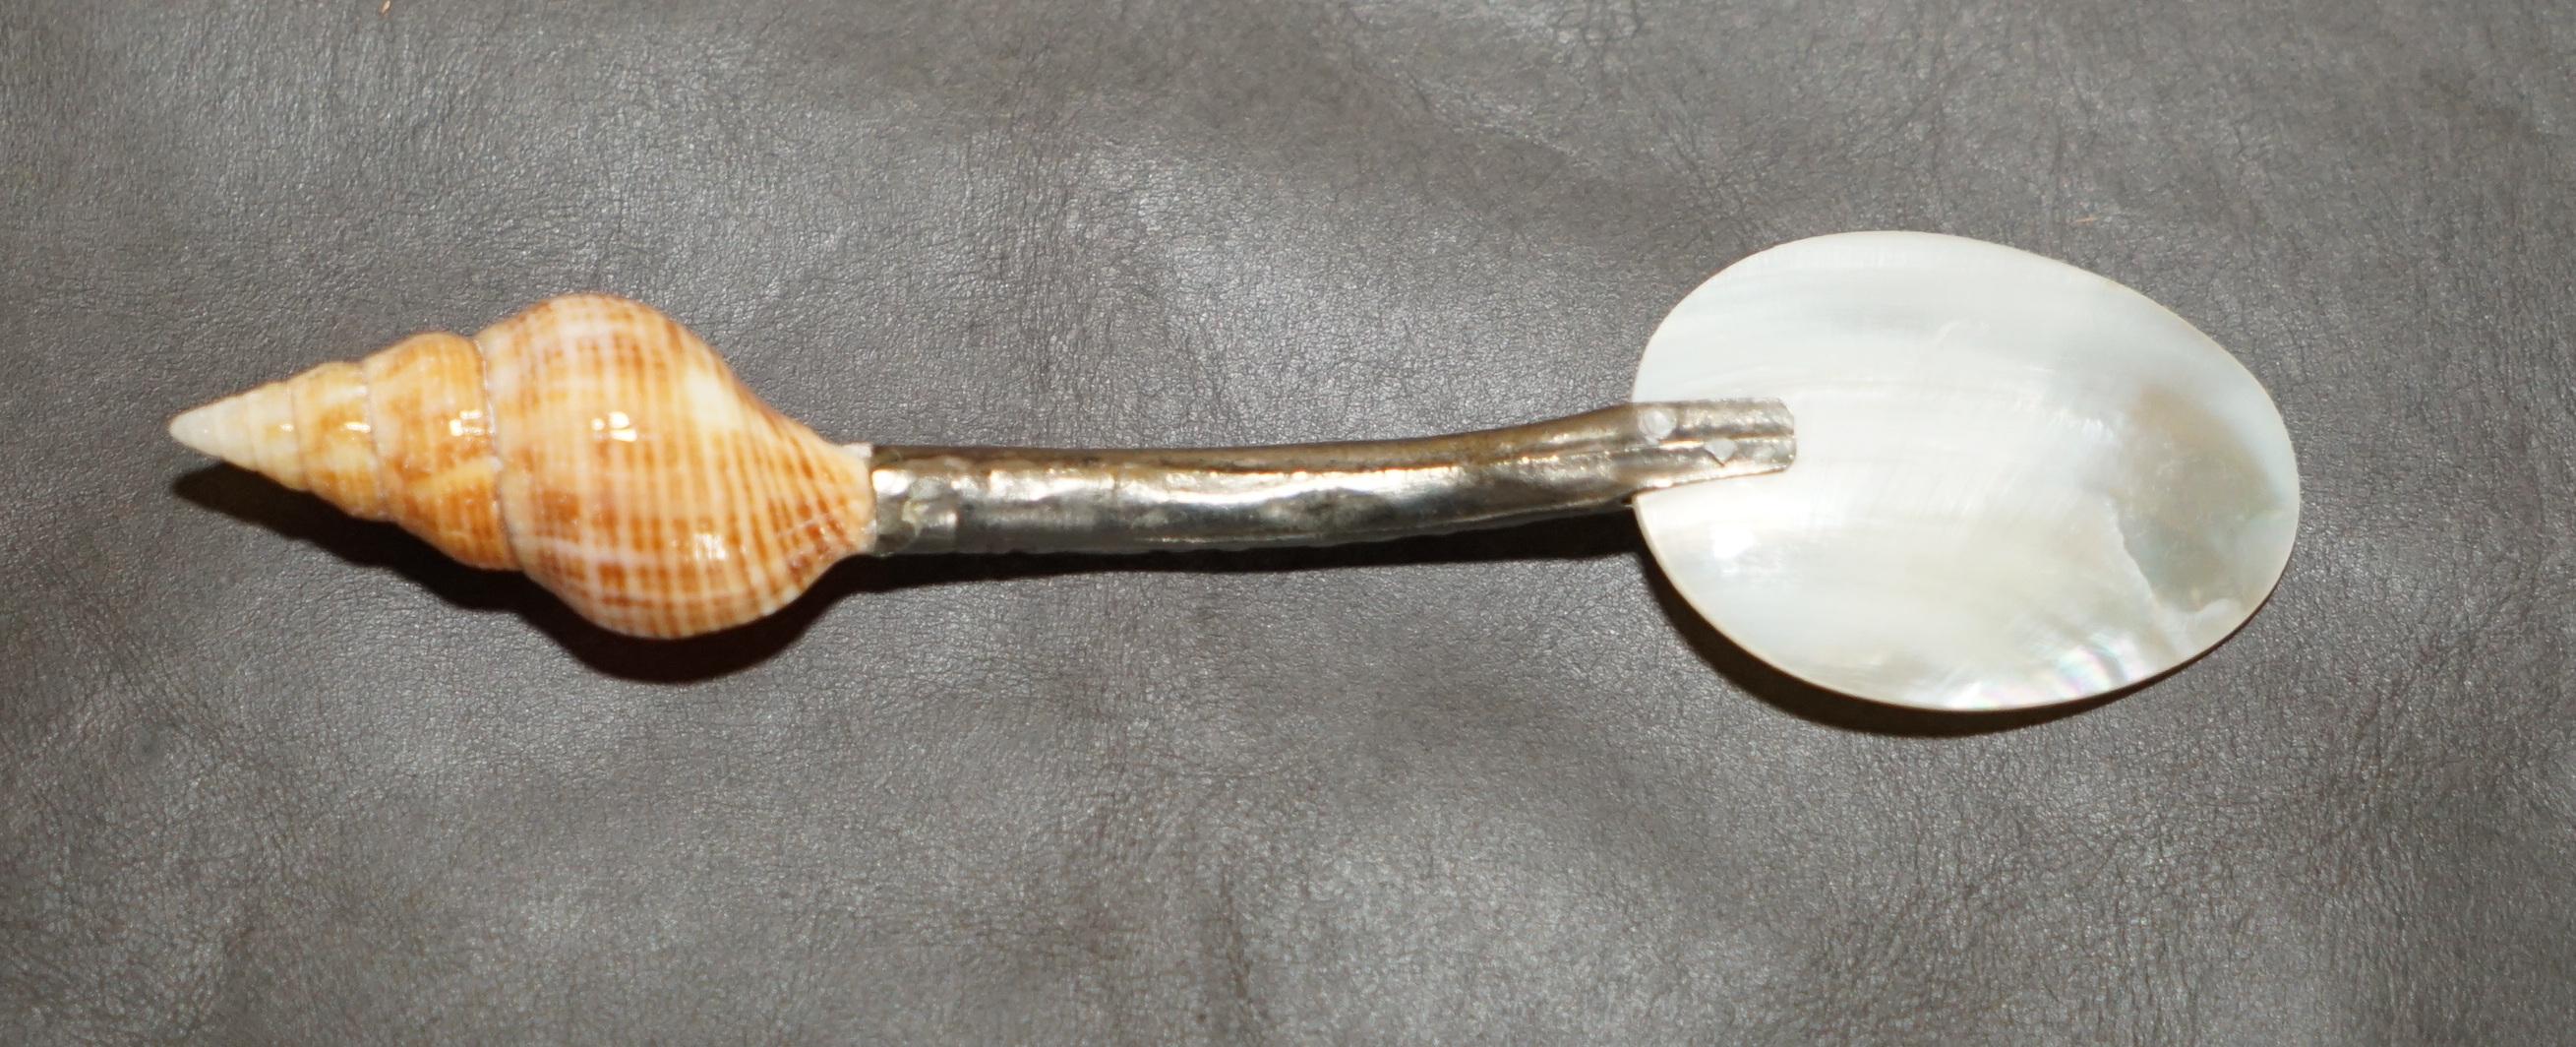 OUR MOUR ViCtorian MOTHER OF PEARL & STERLING SILVER TESTED SHELL TEA SPOONS en vente 4